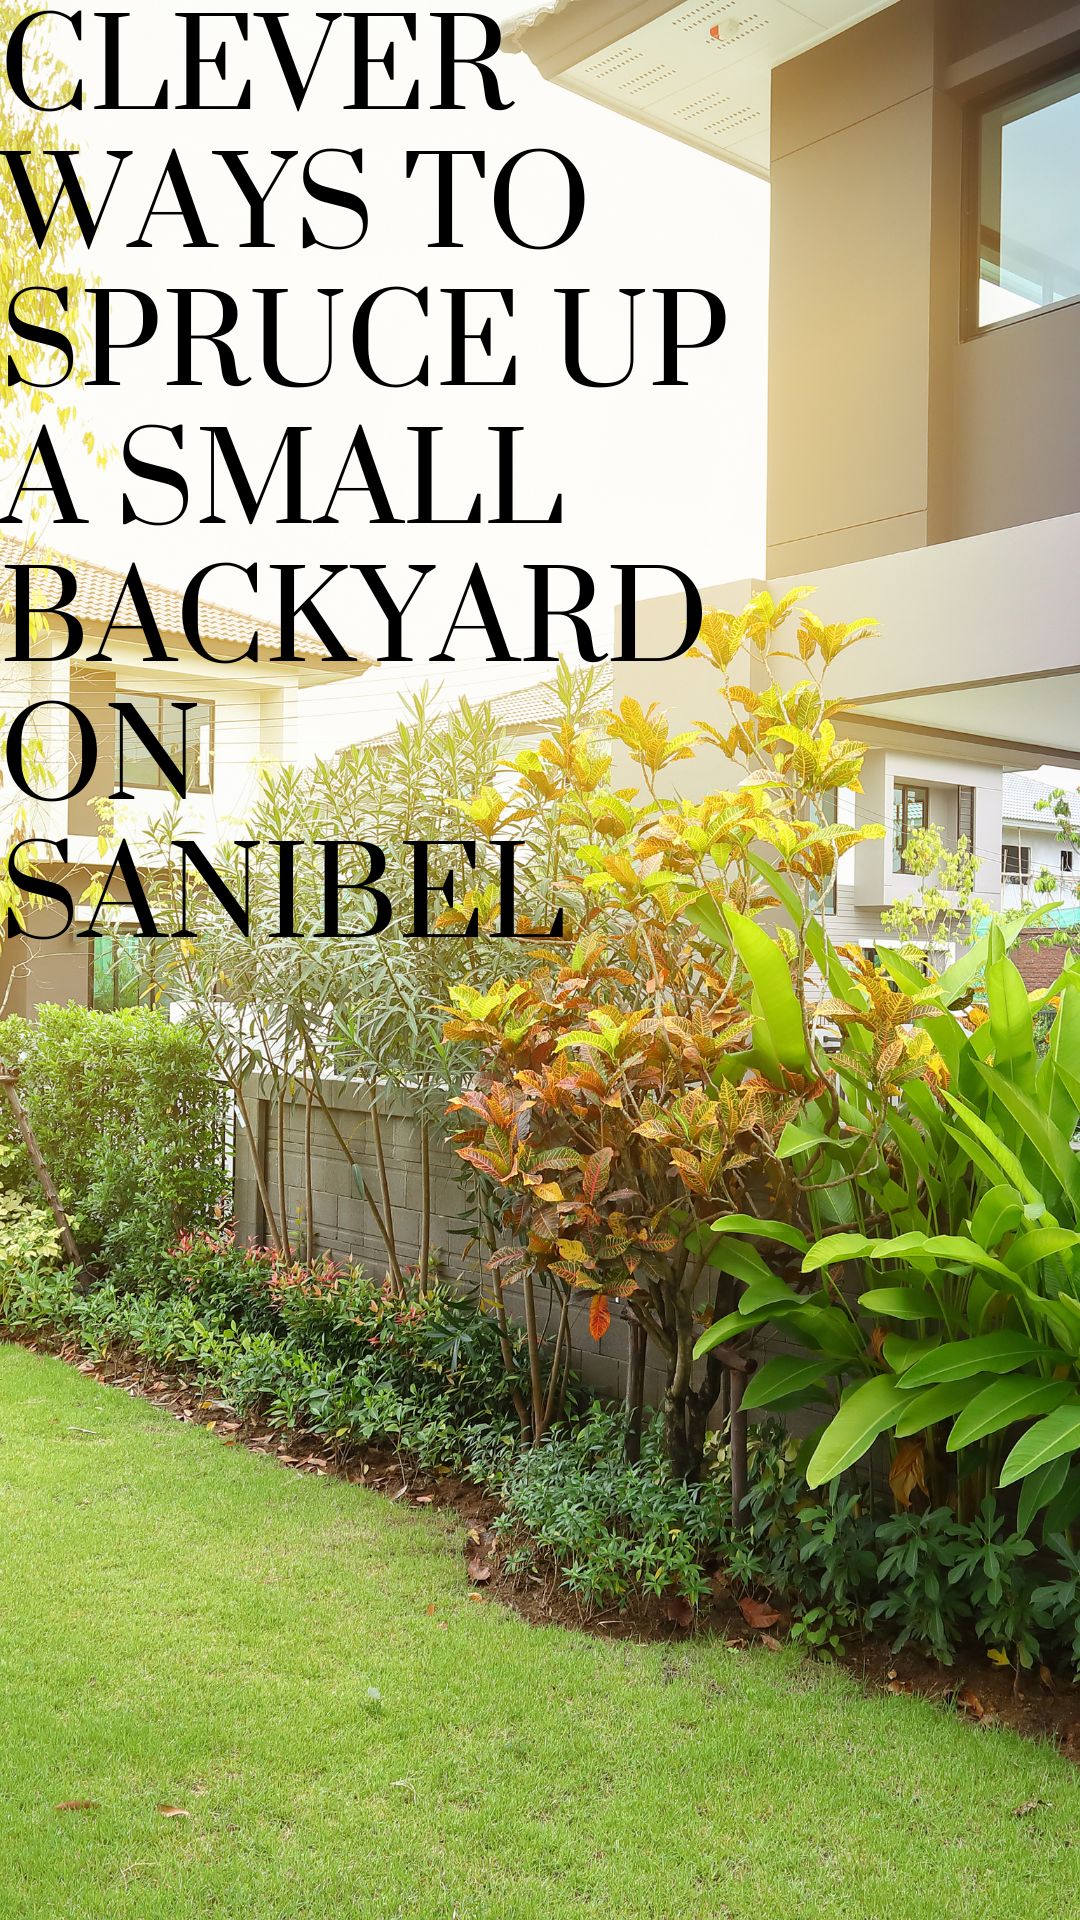 Clever Ways to Spruce Up a Small Backyard on Sanibel